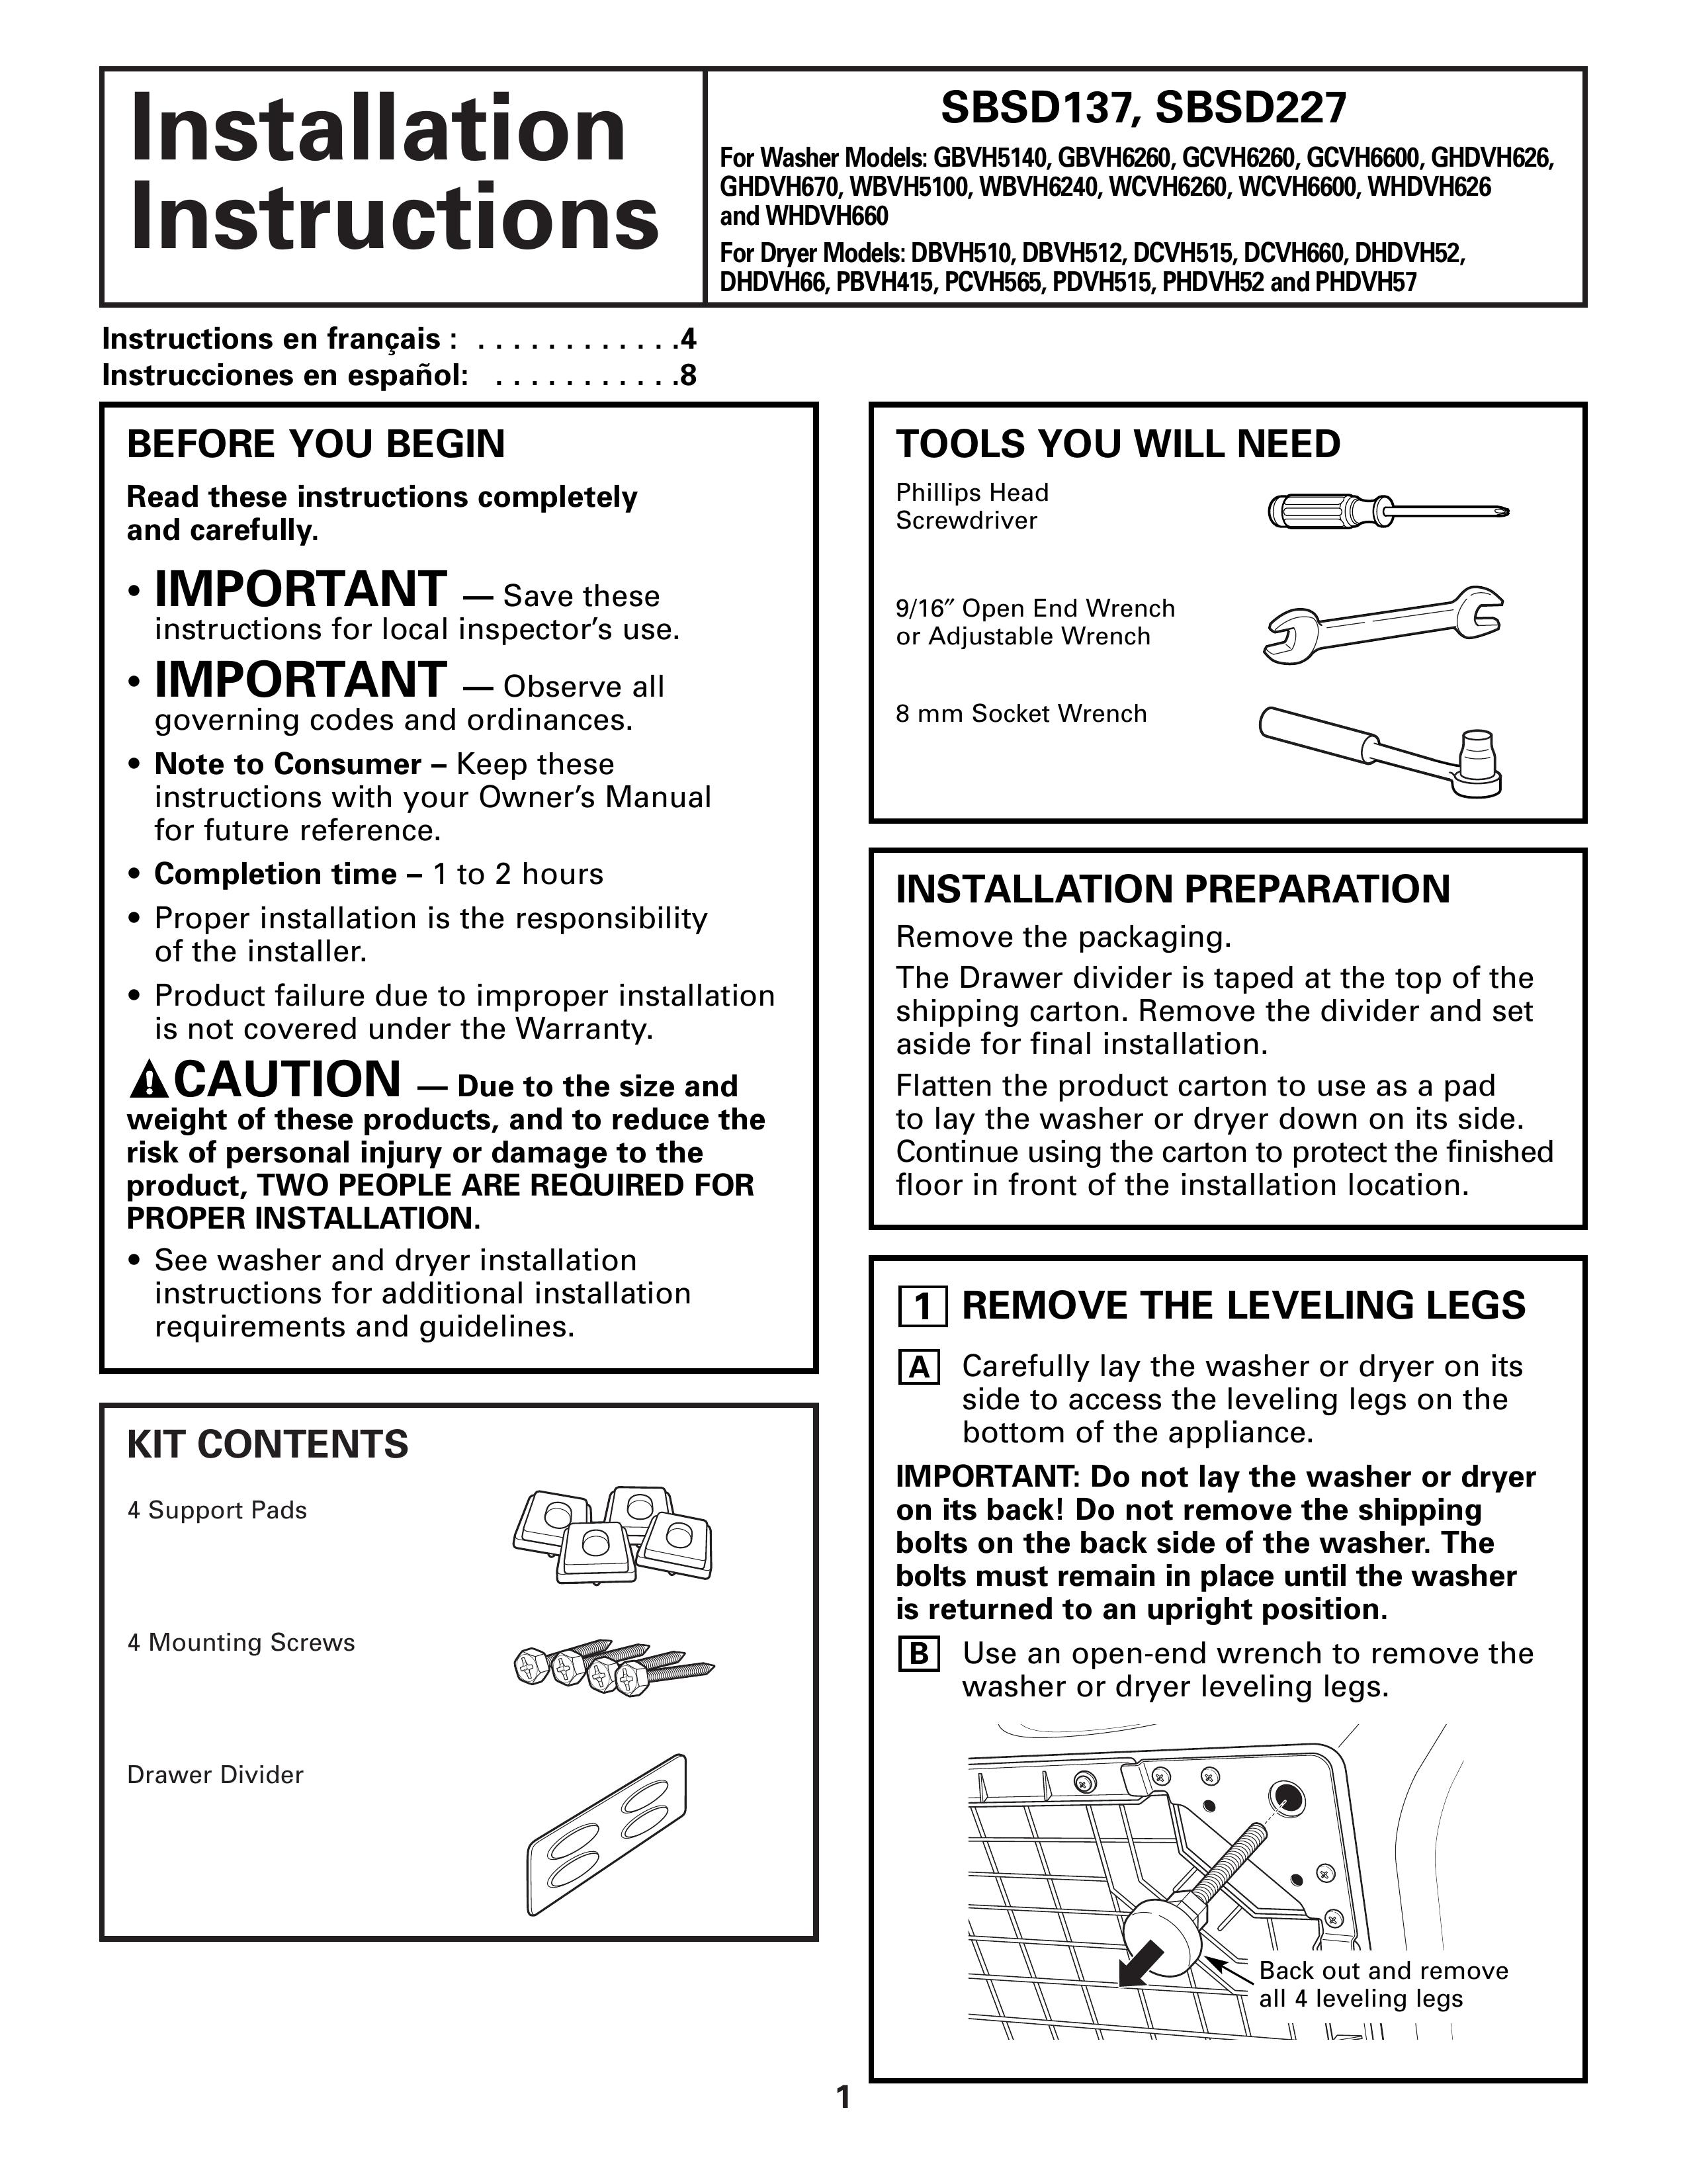 GE SBSD137 Washer Accessories User Manual